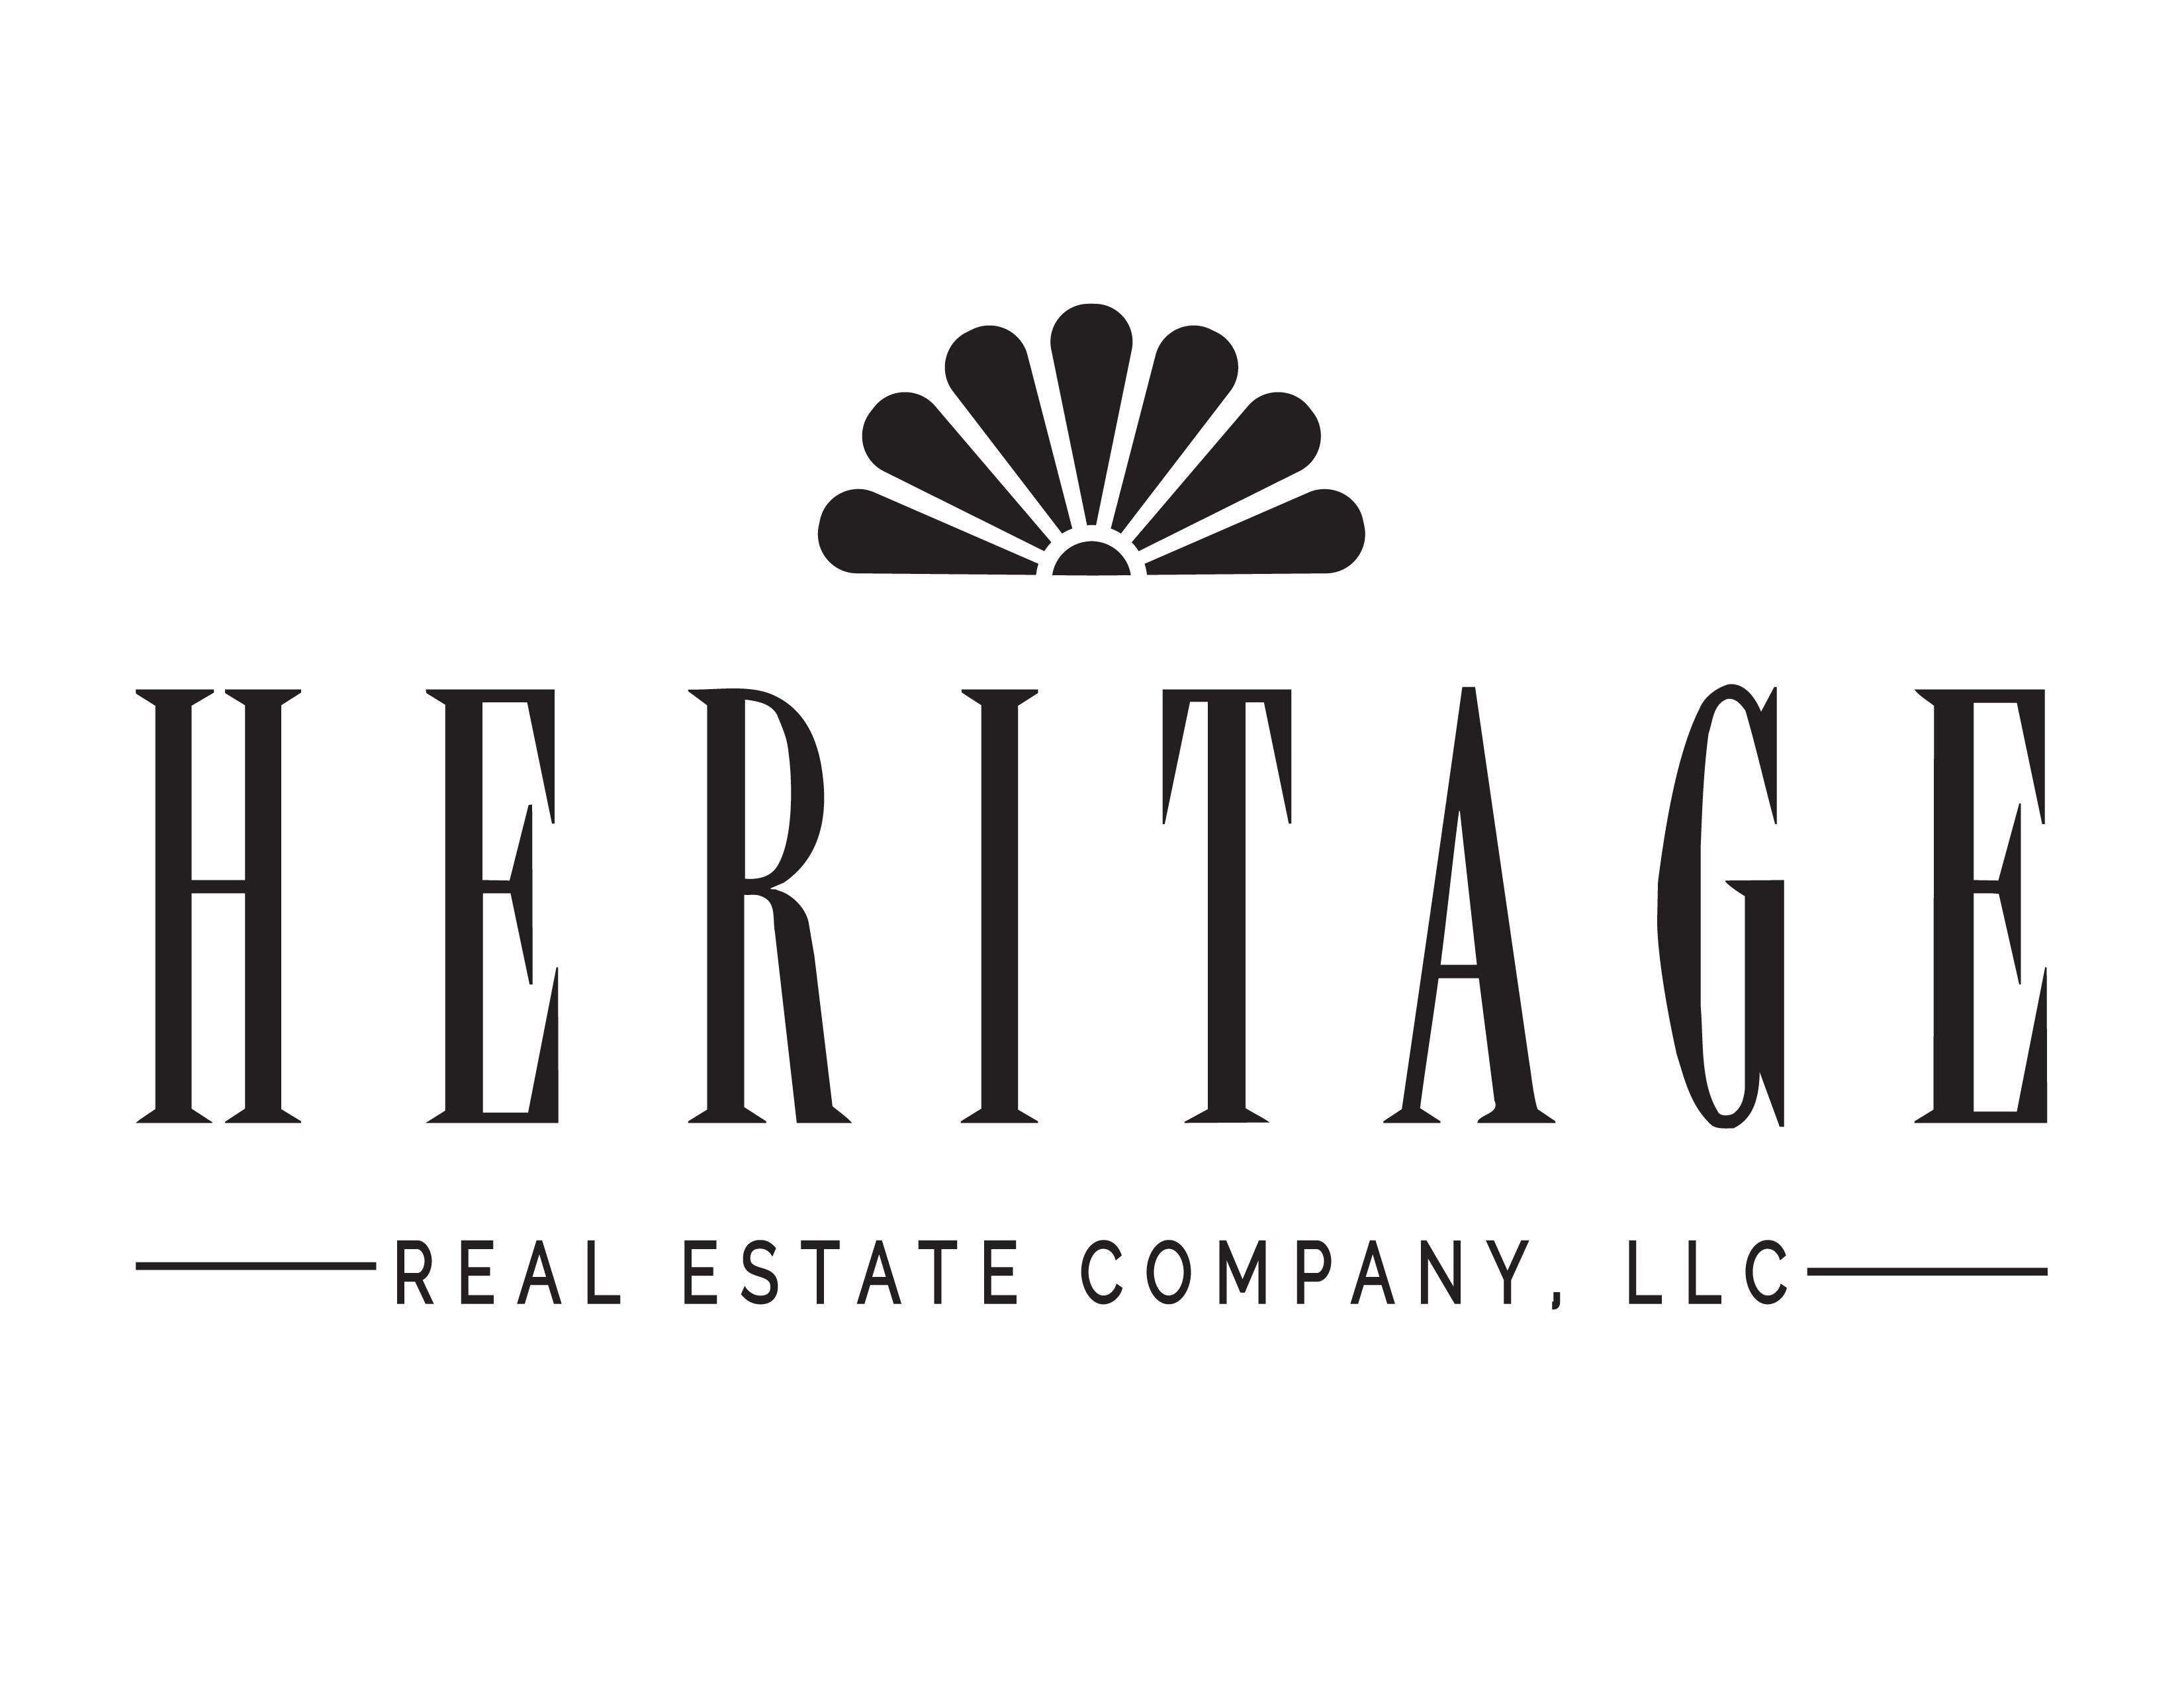 Logo for Heritage Real Estate Company